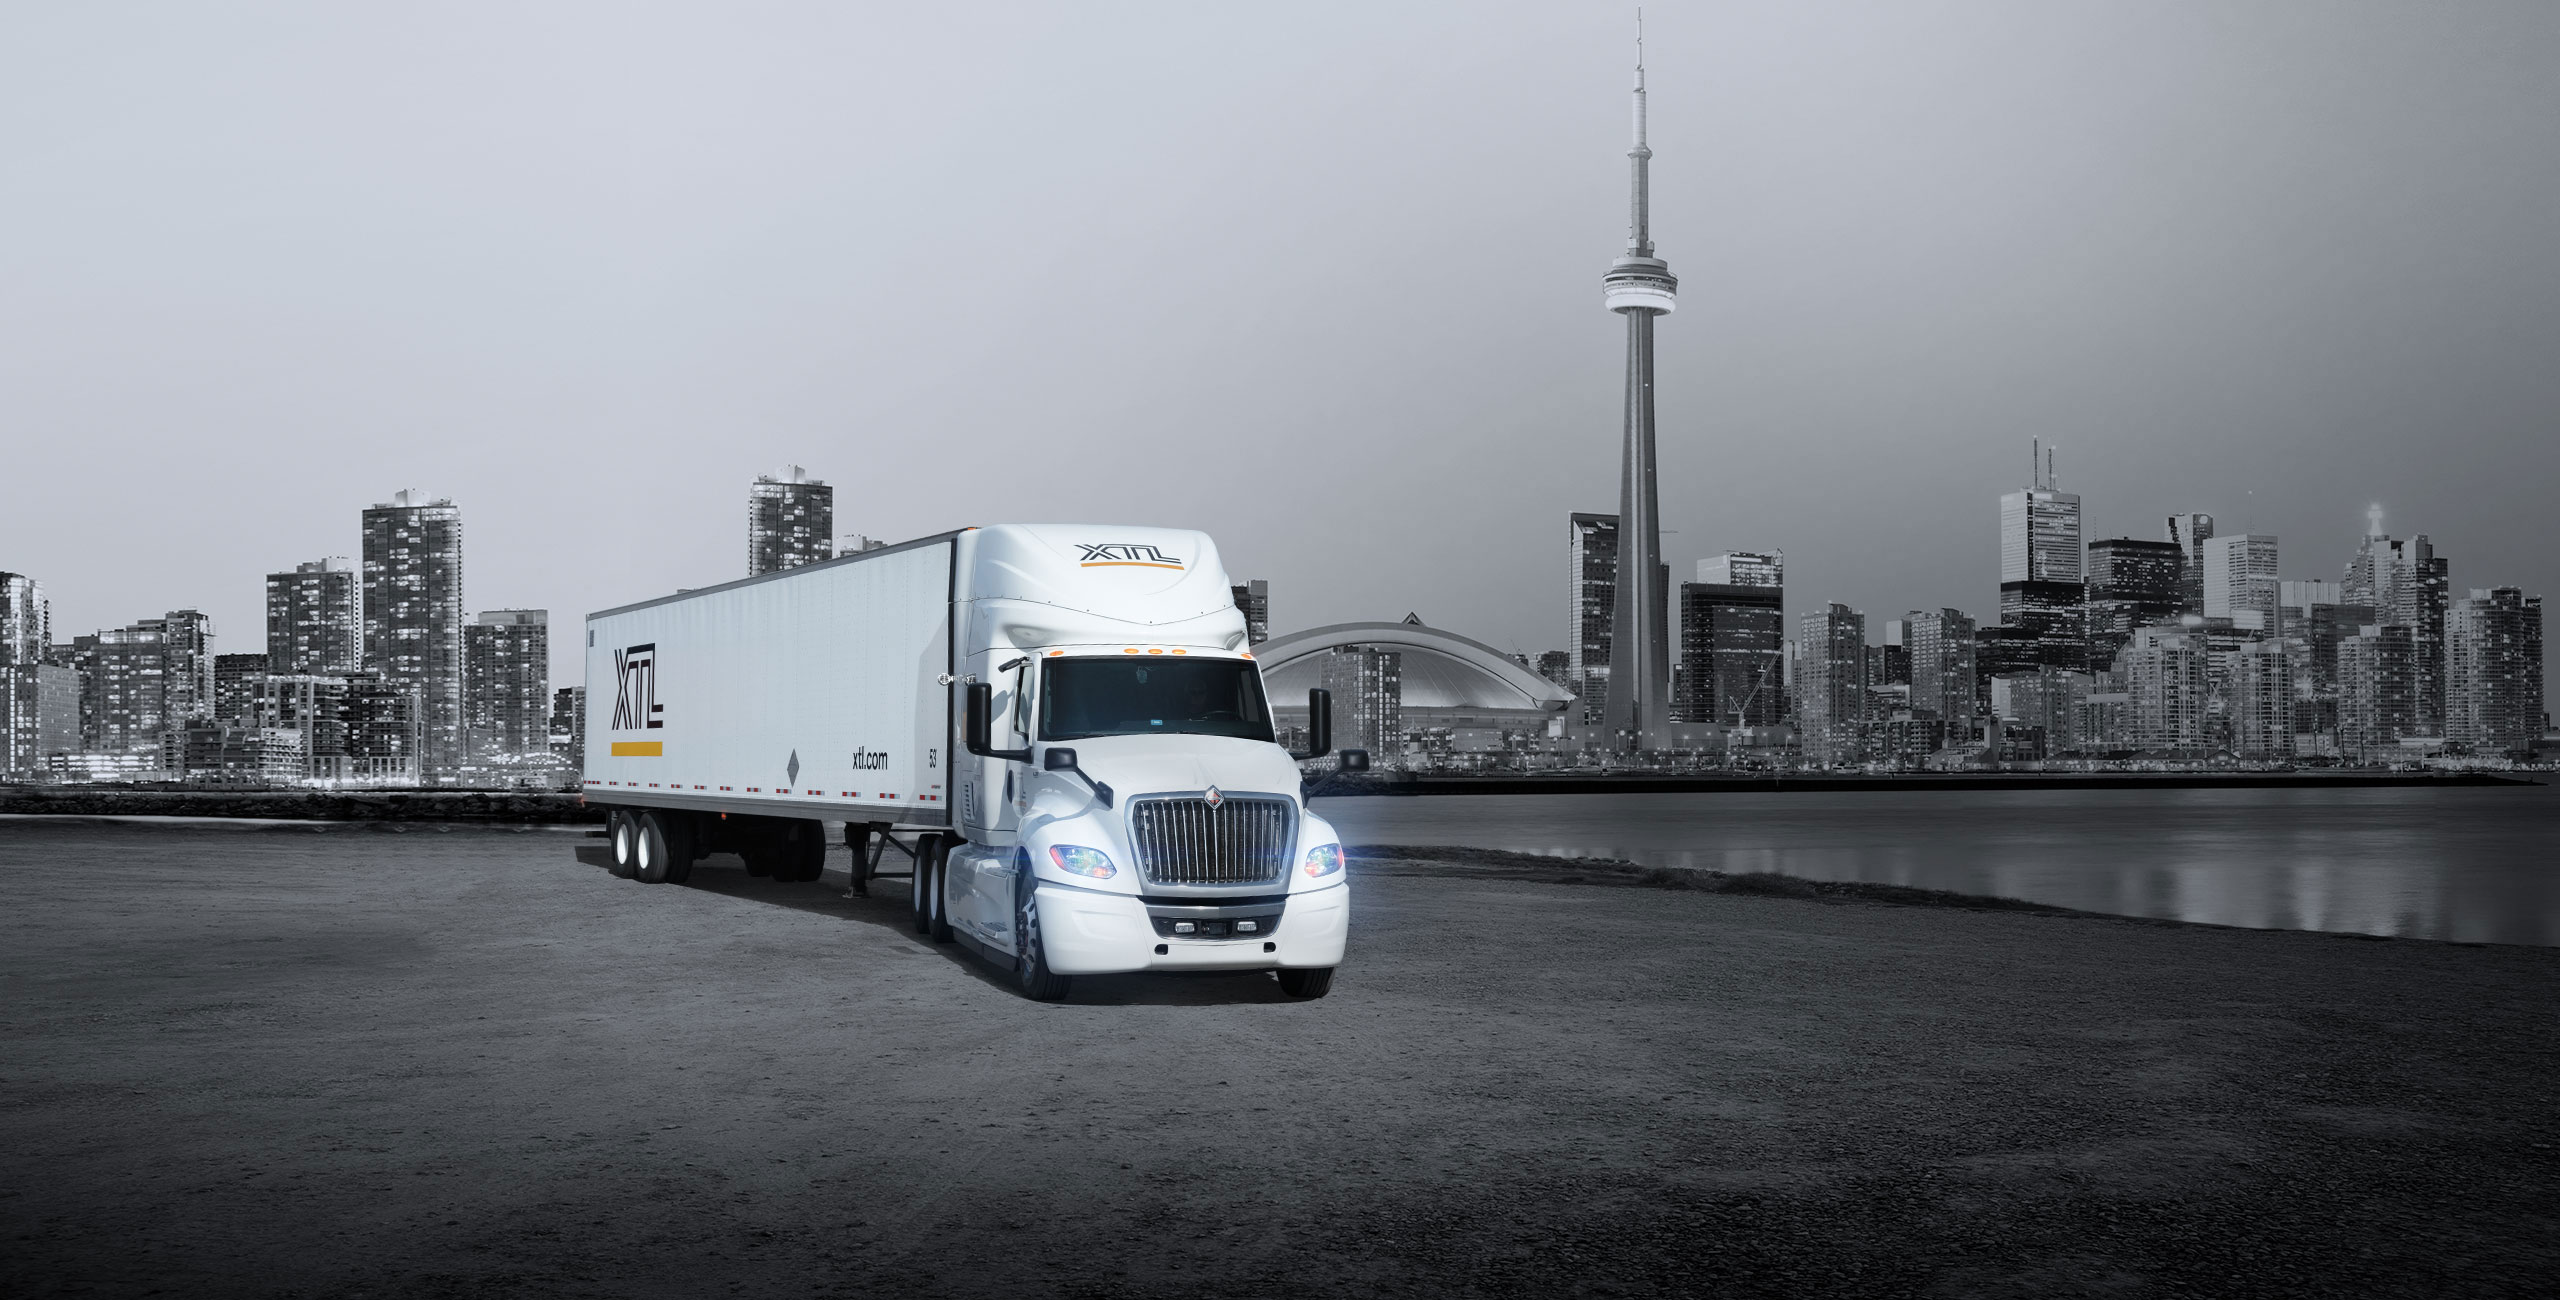 XTL transport truck parked, with city of Toronto in the background